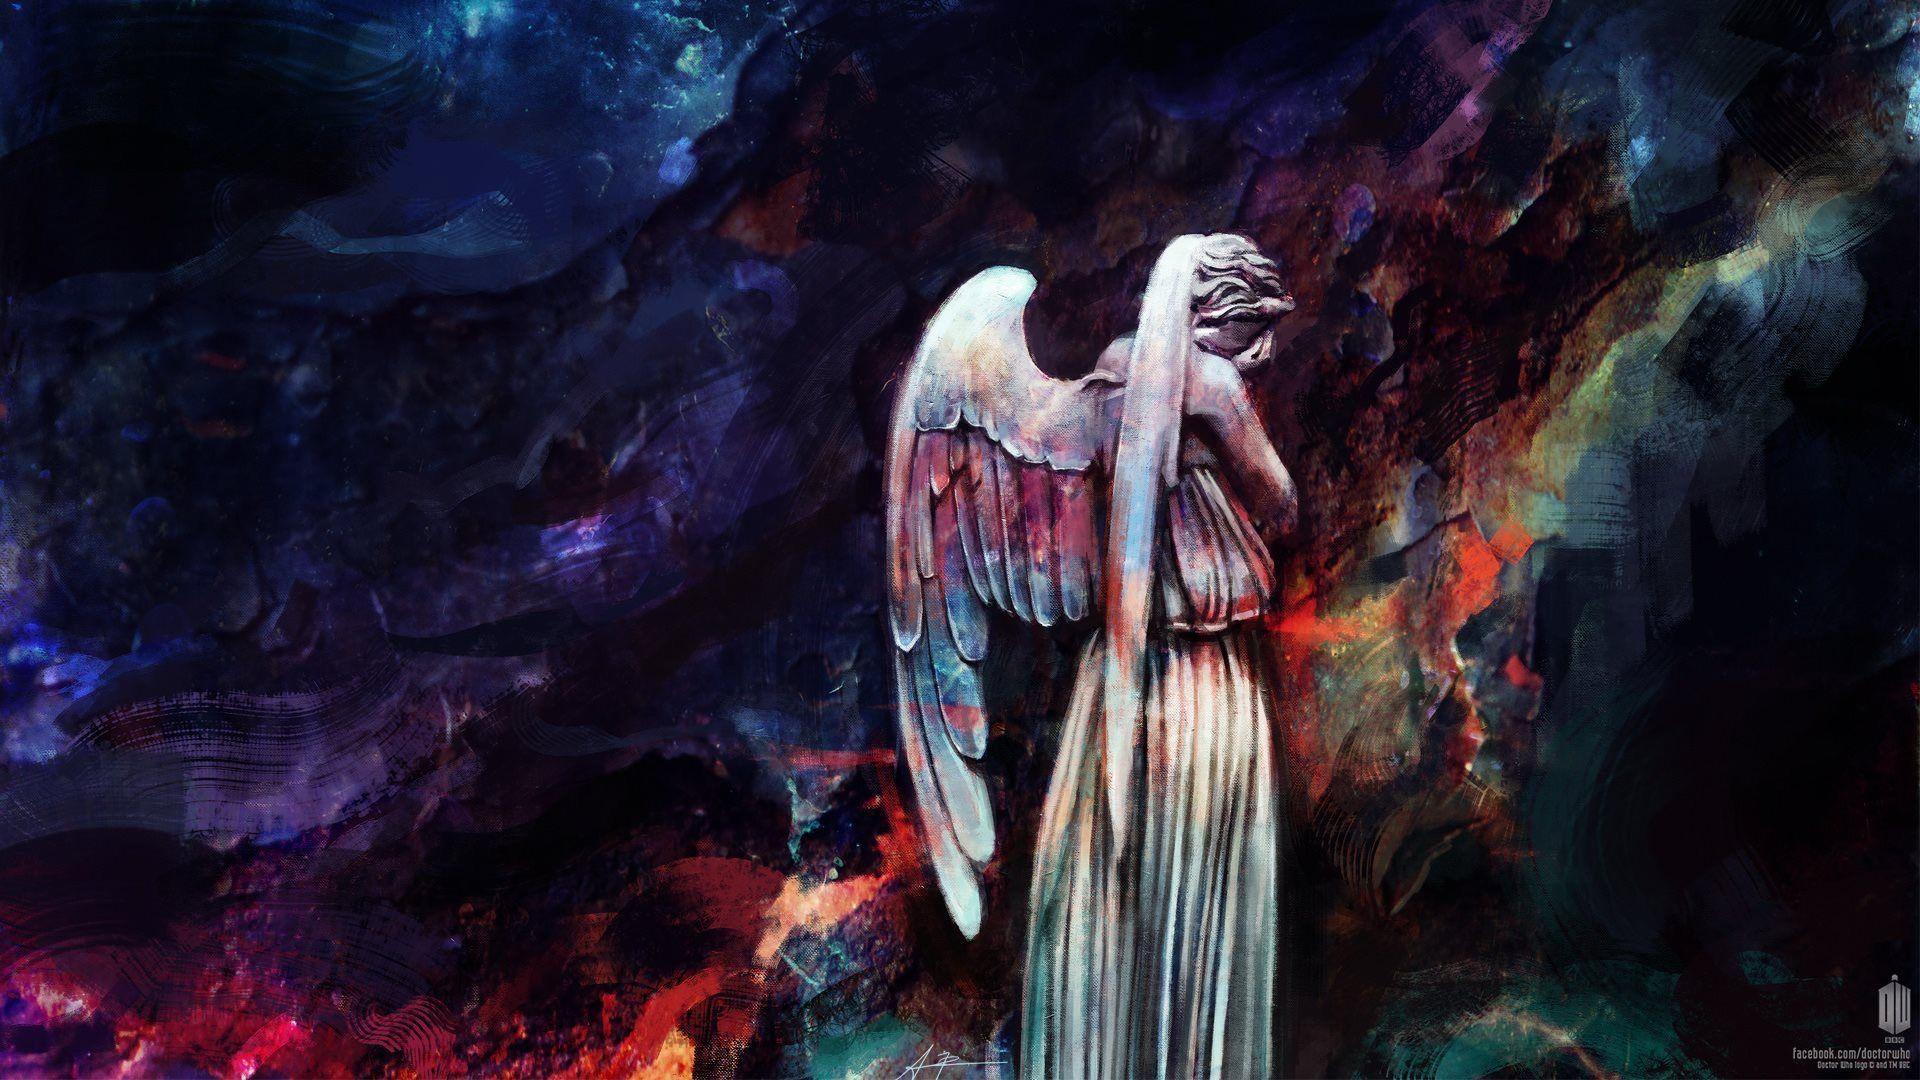 Doctor Who Weeping Angels by Alice X. Zhang. All things doctor who